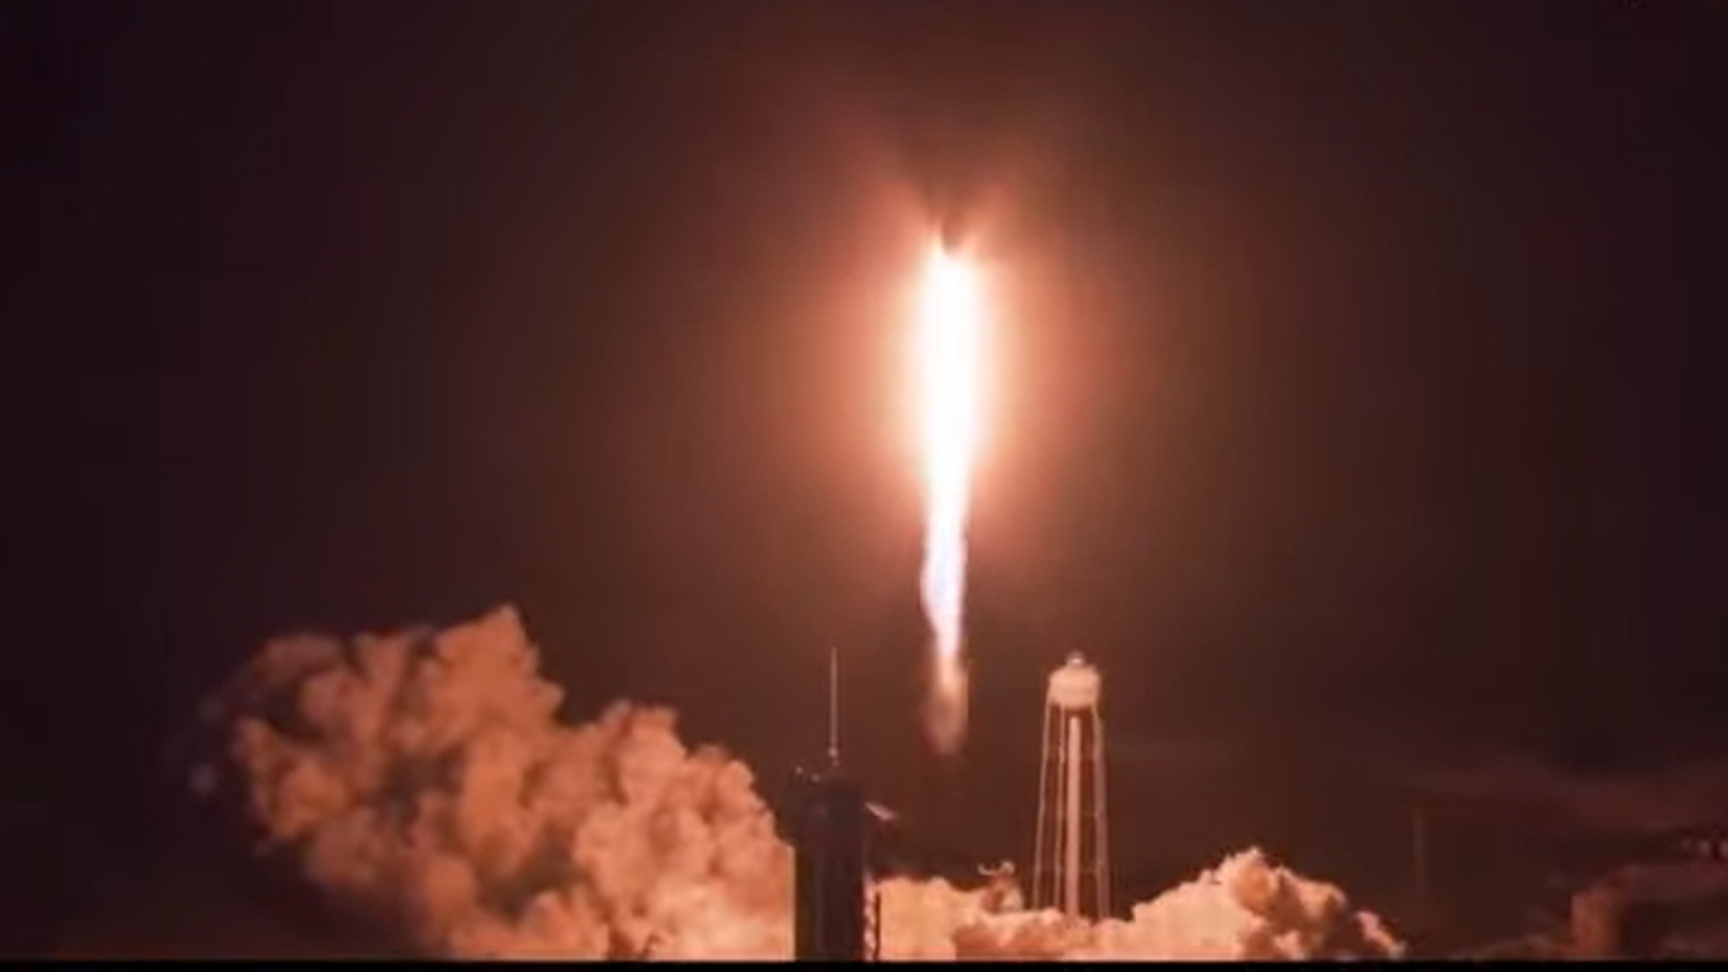 SpaceX's Falcon 9 rocket launches the Crew-6 astronauts.